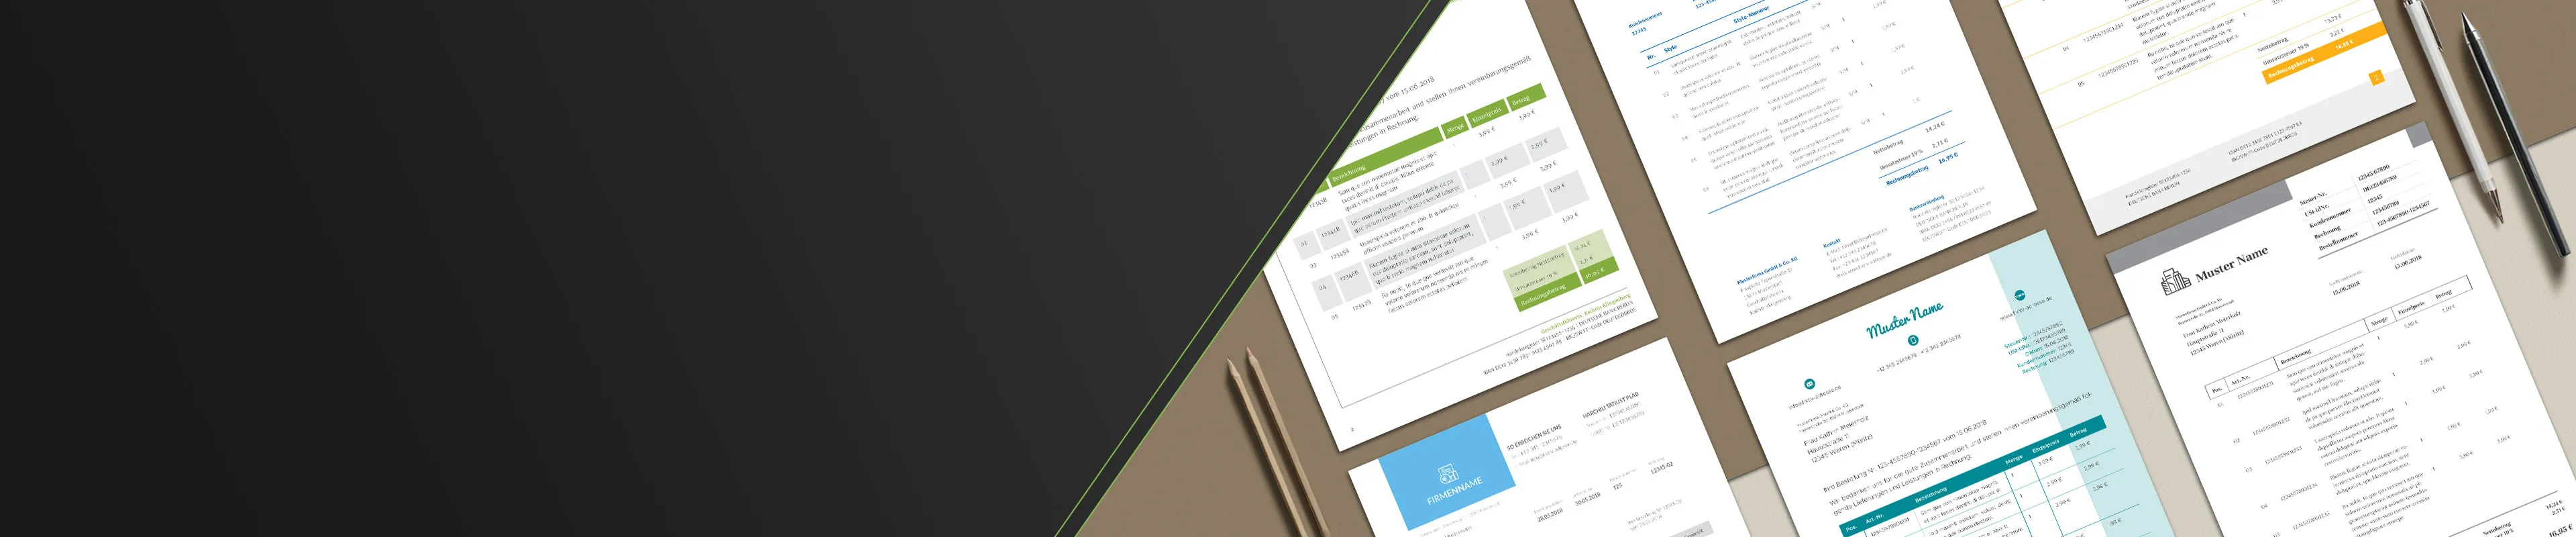 Achieve professional positioning with our invoice templates